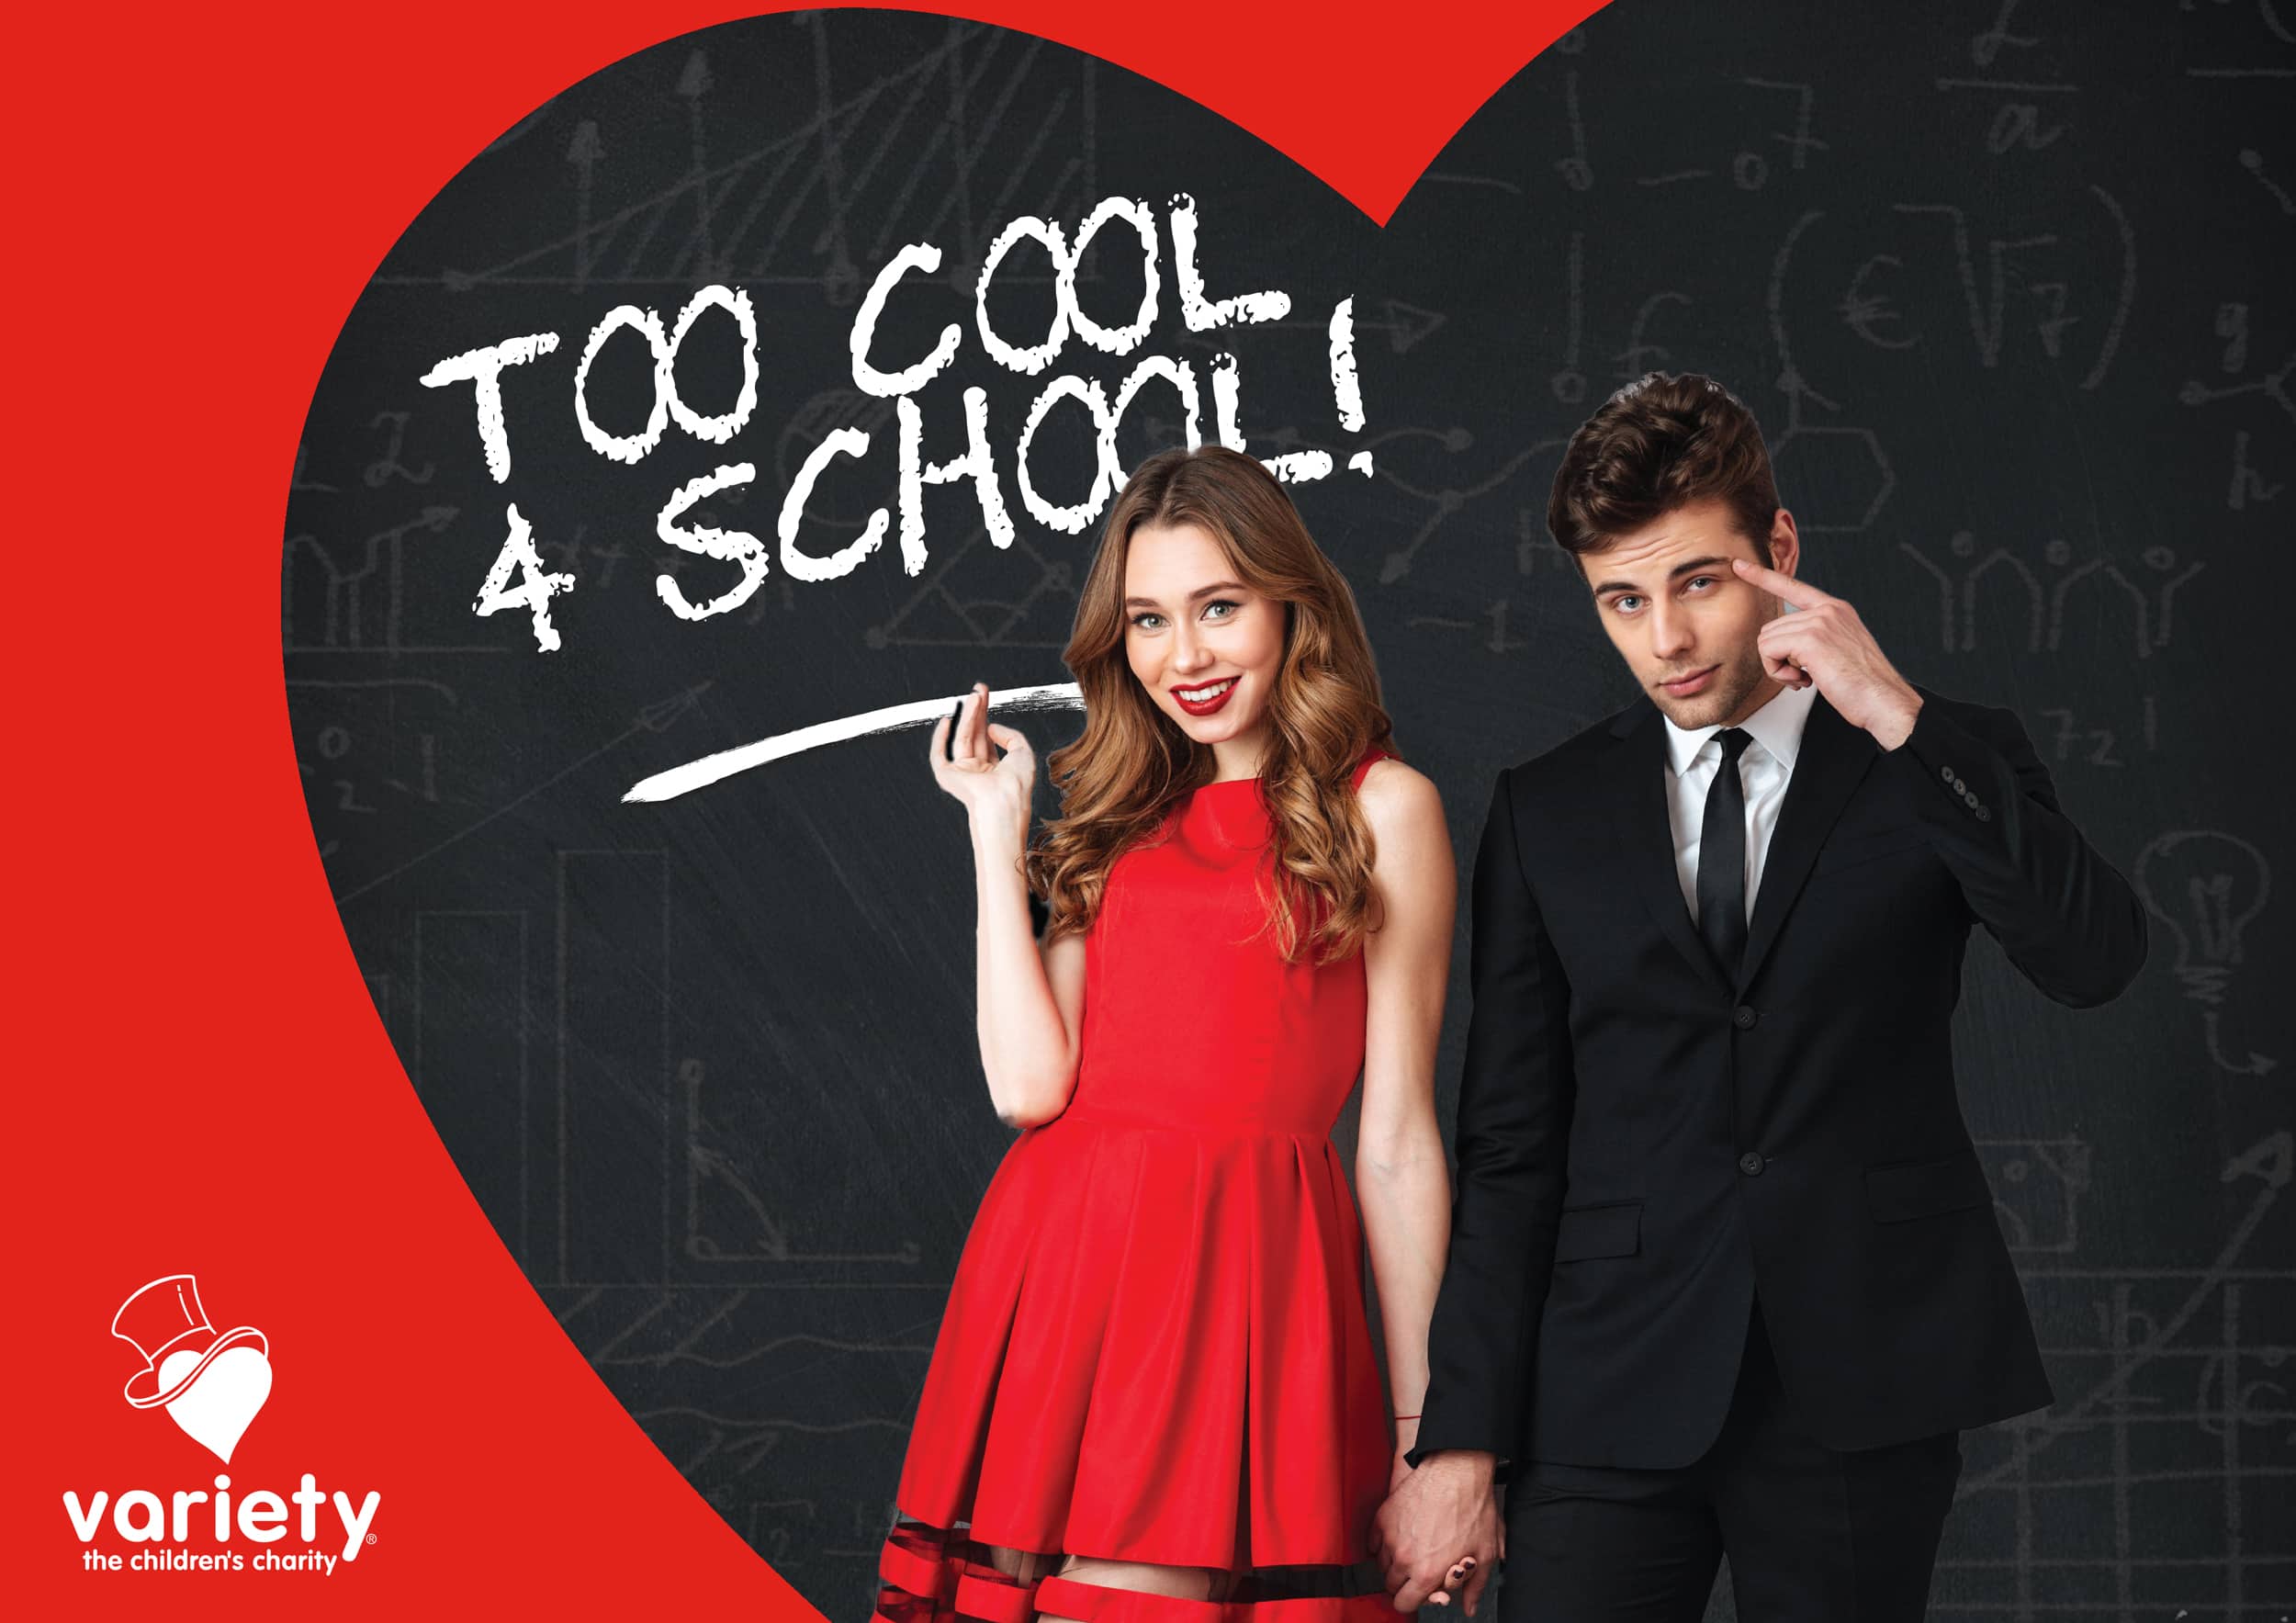 Variety Ball Theme has been announced! Are you ready to be “Too Cool 4 School!”